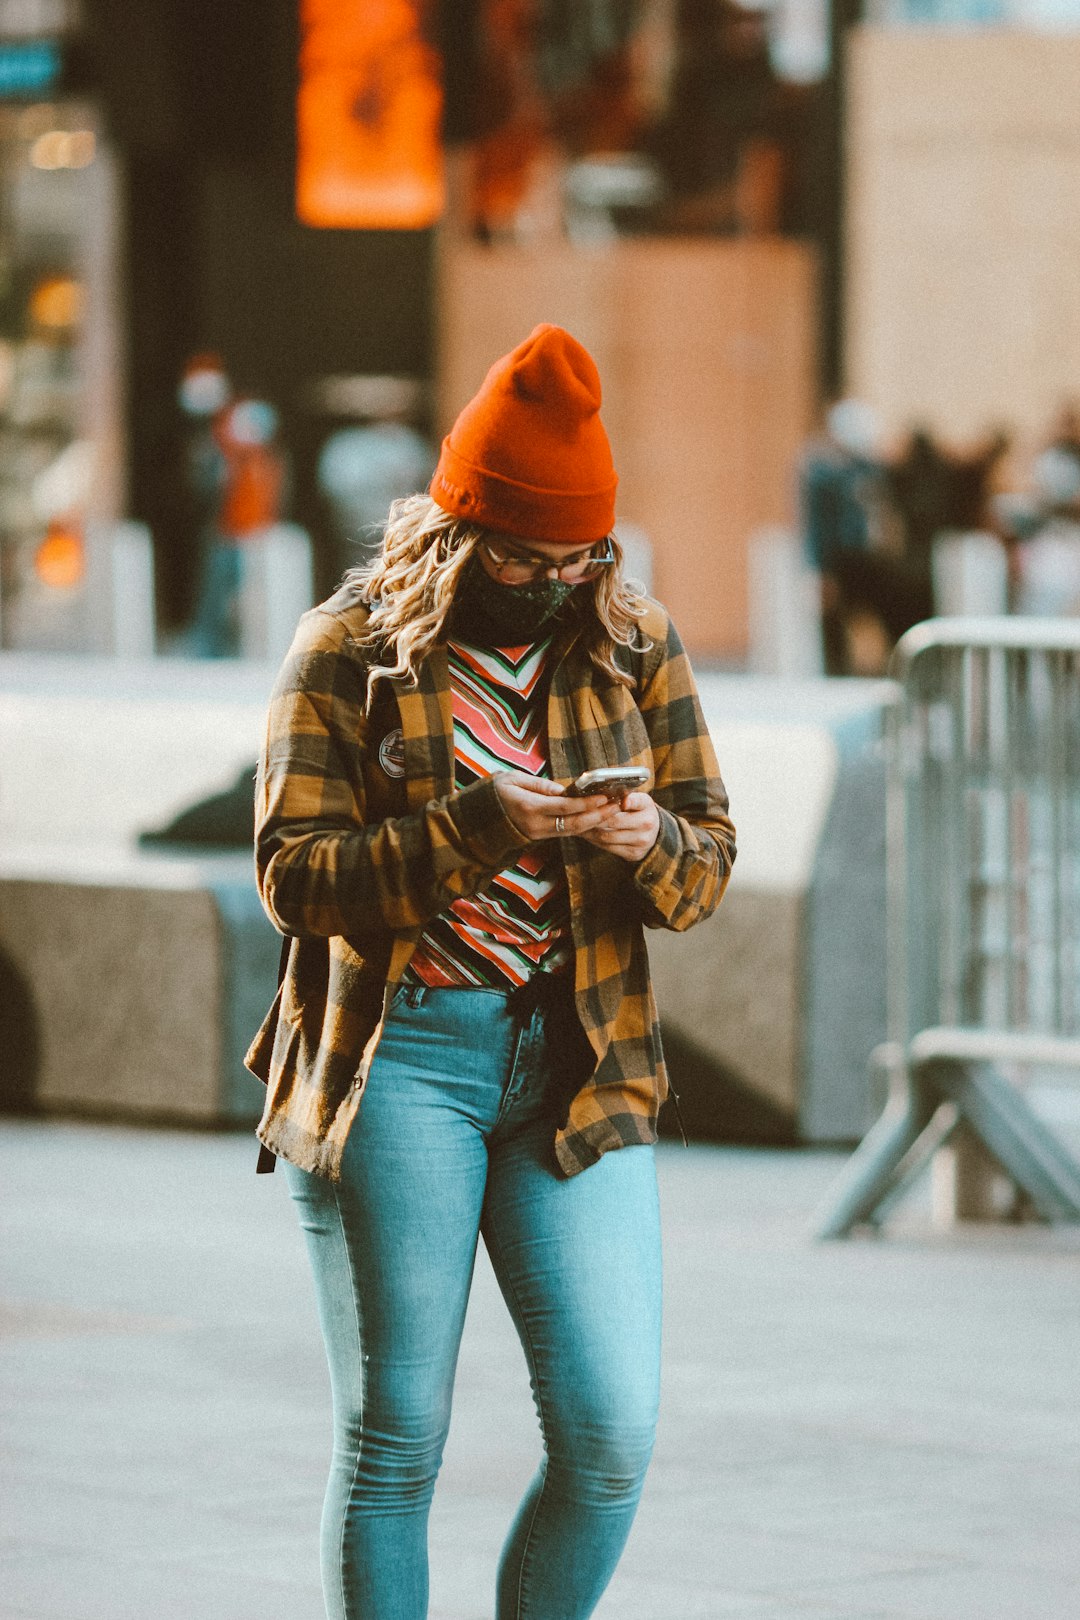 woman in brown and black jacket and blue denim jeans wearing orange knit cap